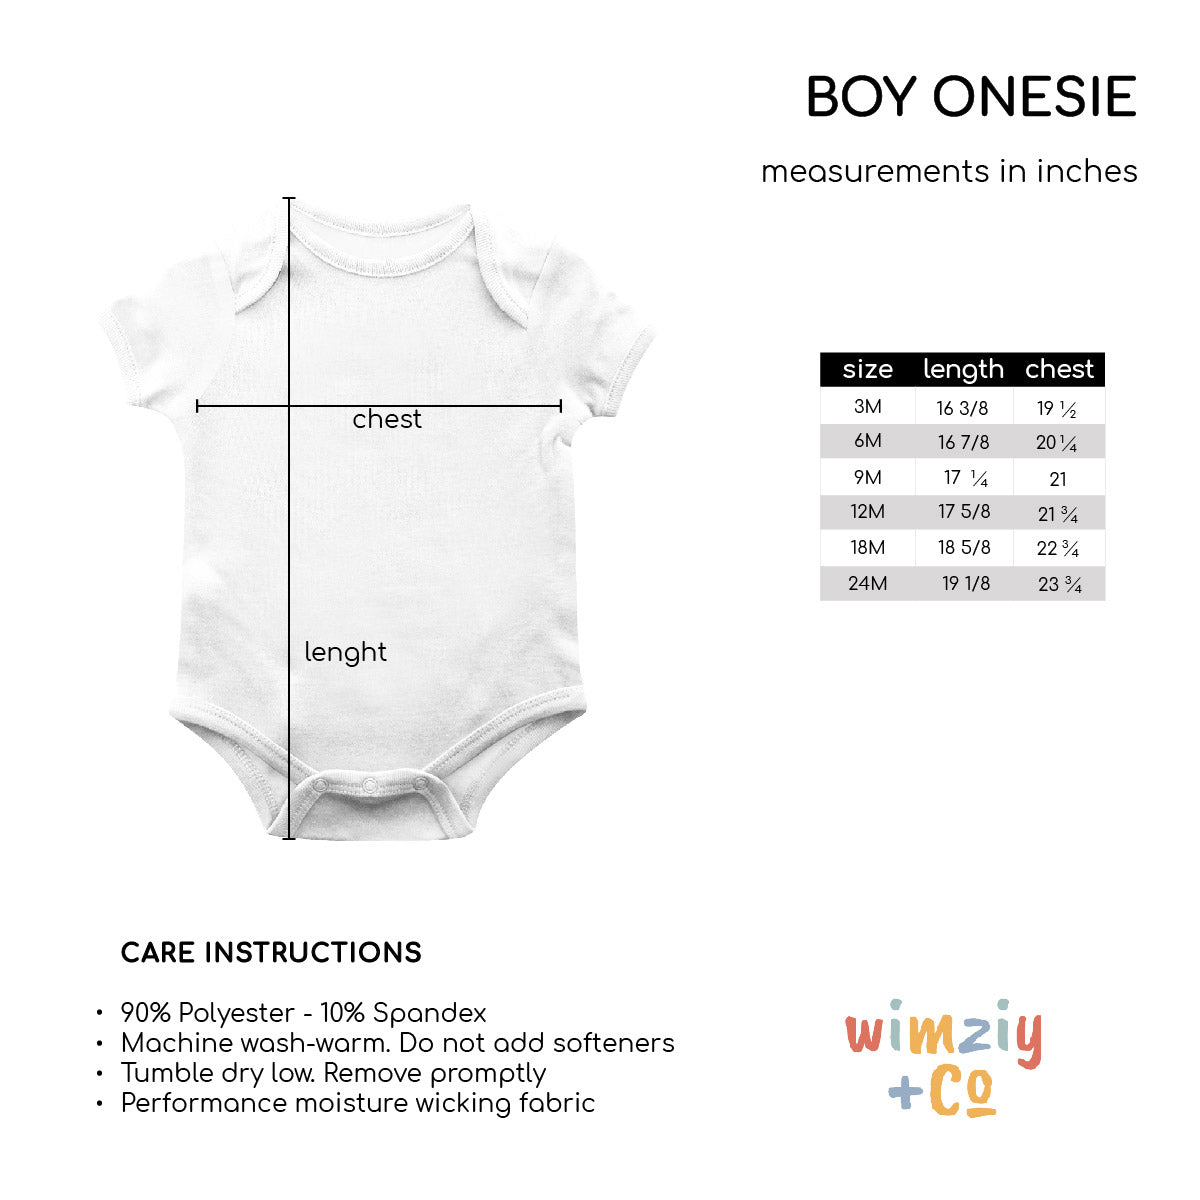 Name Red and White Short Sleeve Boys Onesie - Wimziy&Co.